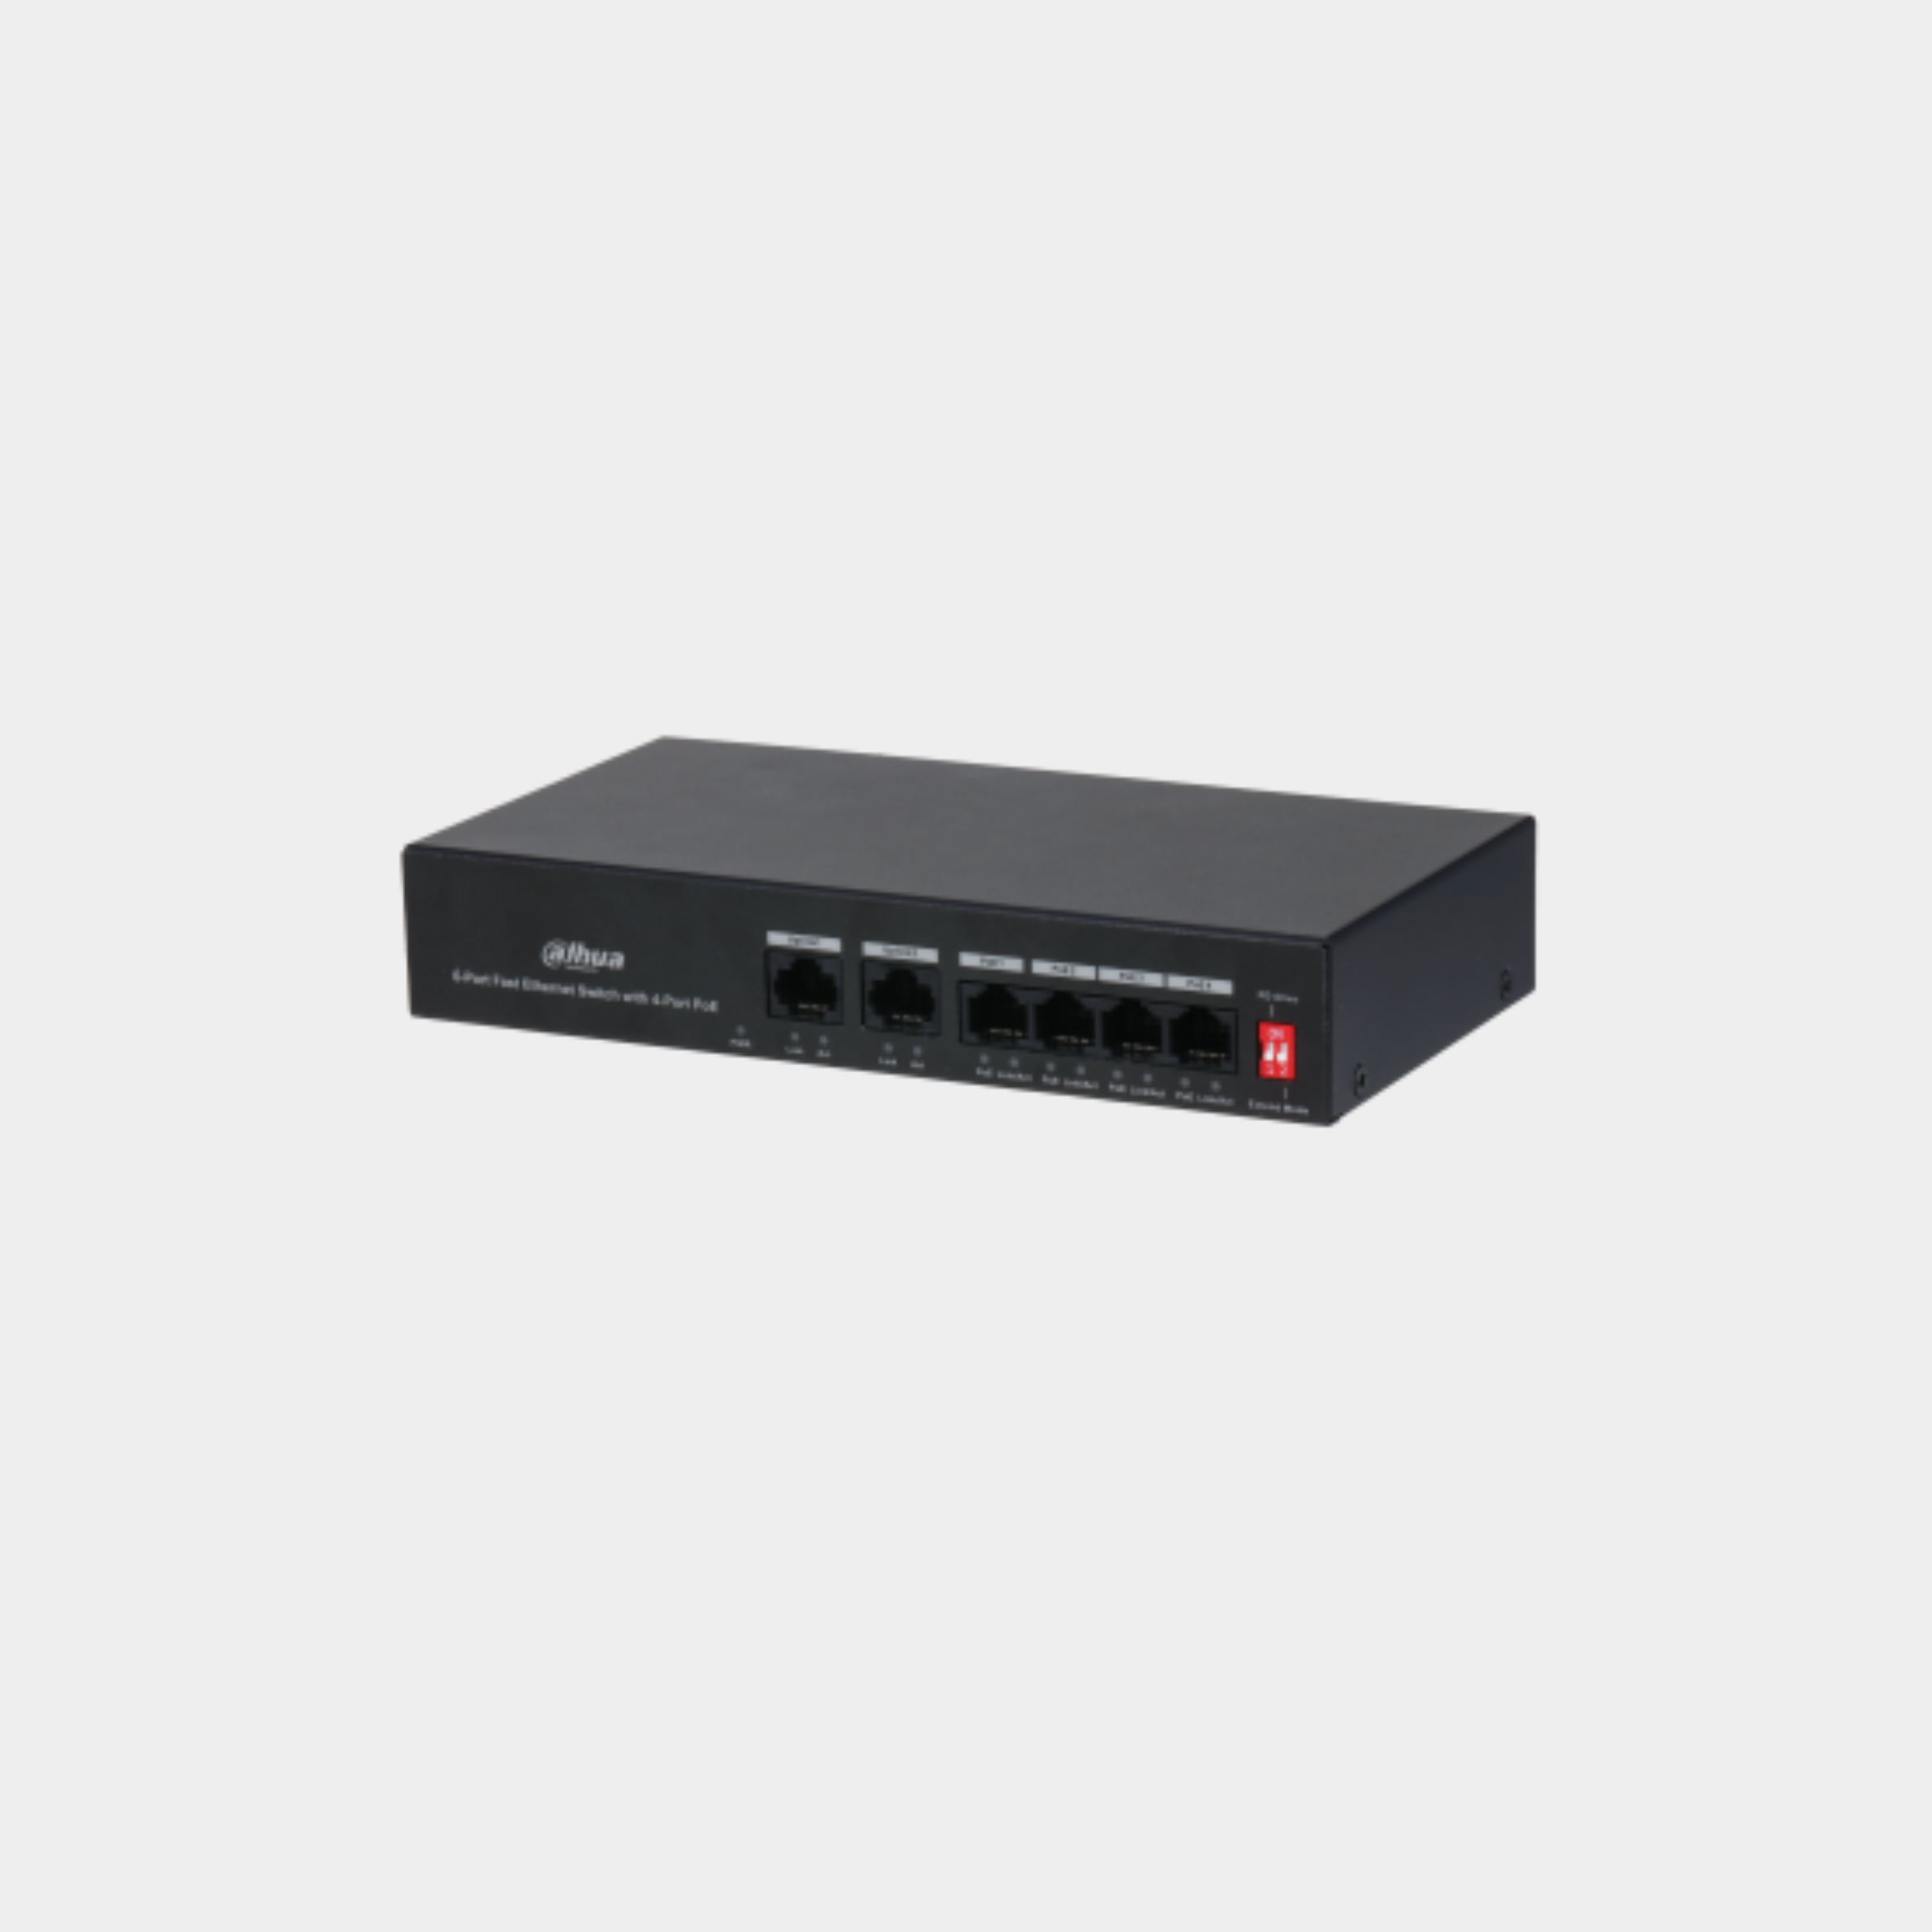 Dahua 6-Port Fast Ethernet Switch with 4-Port PoE